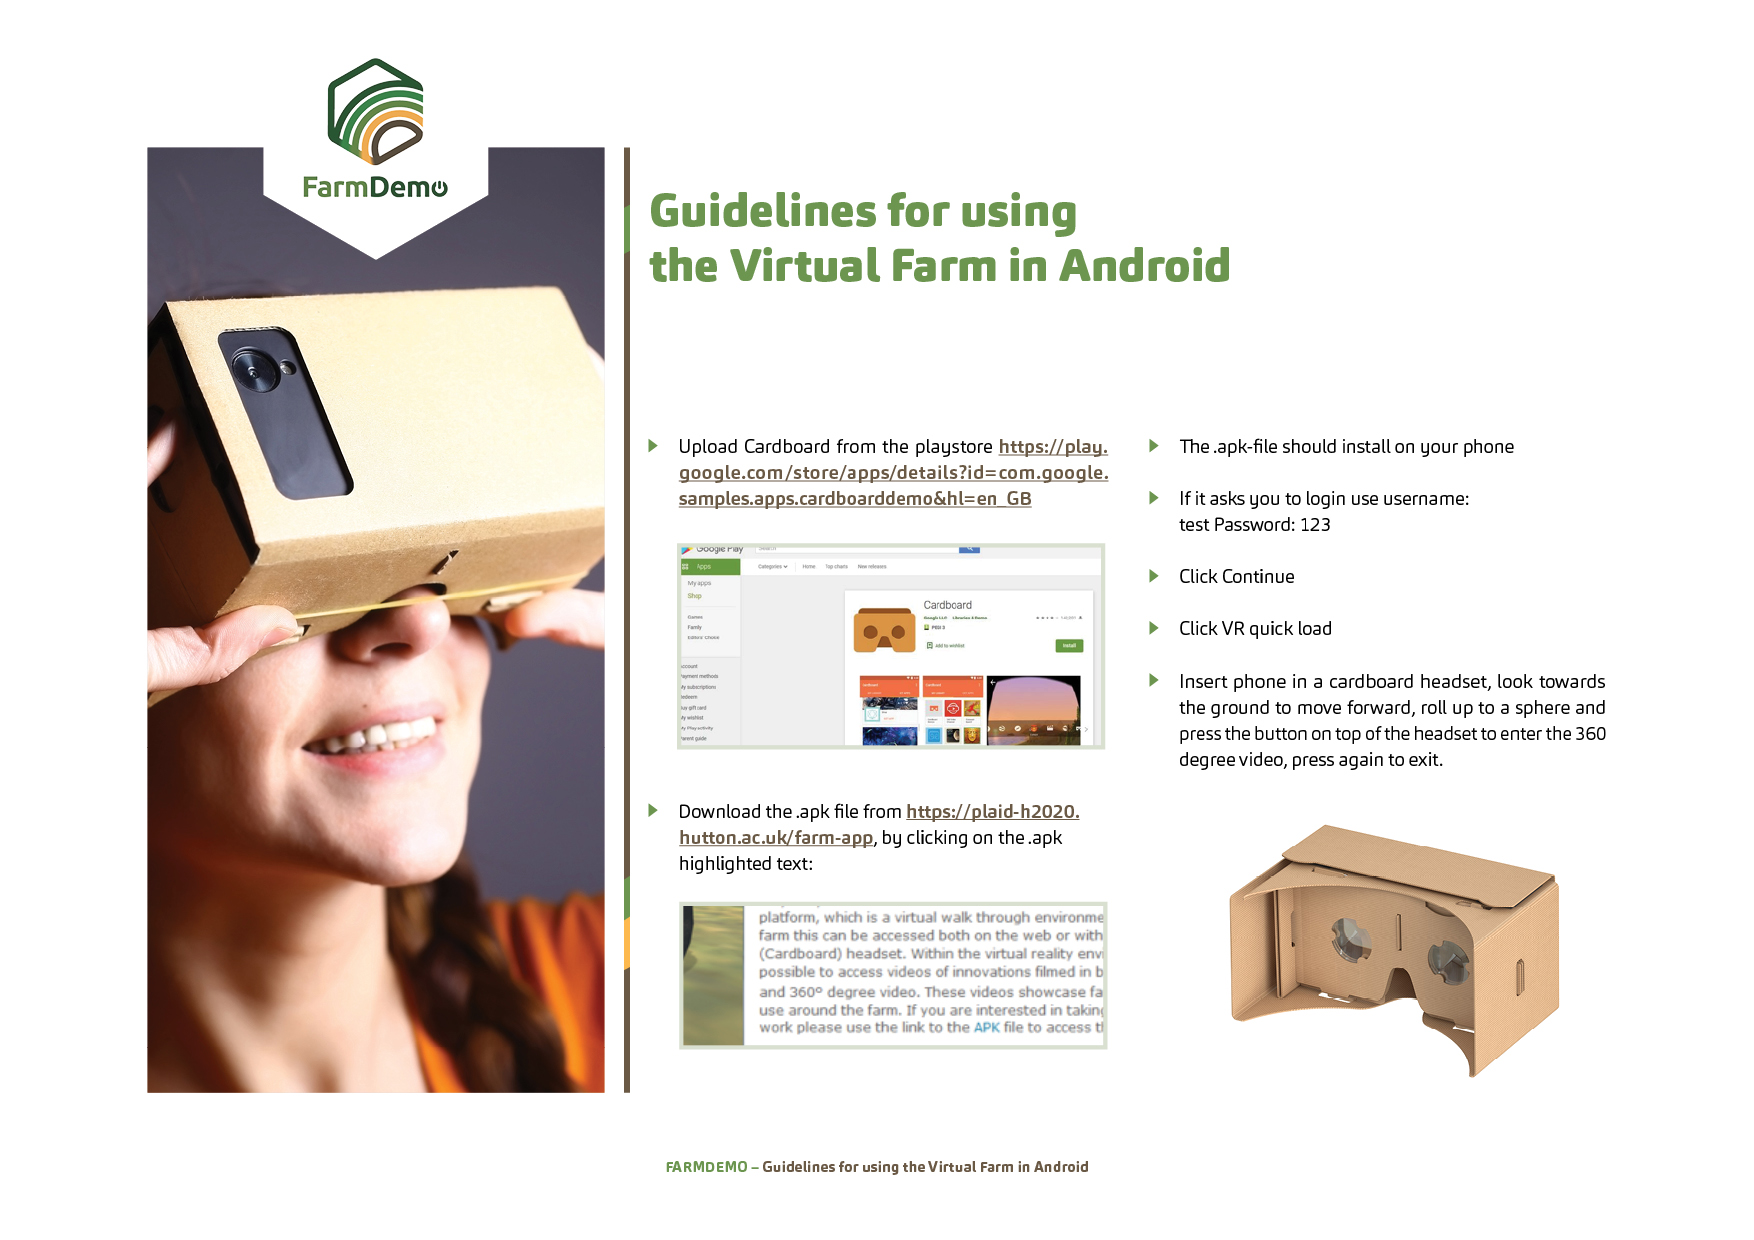 05_Guidelines for using the virtual farm in Android_EN